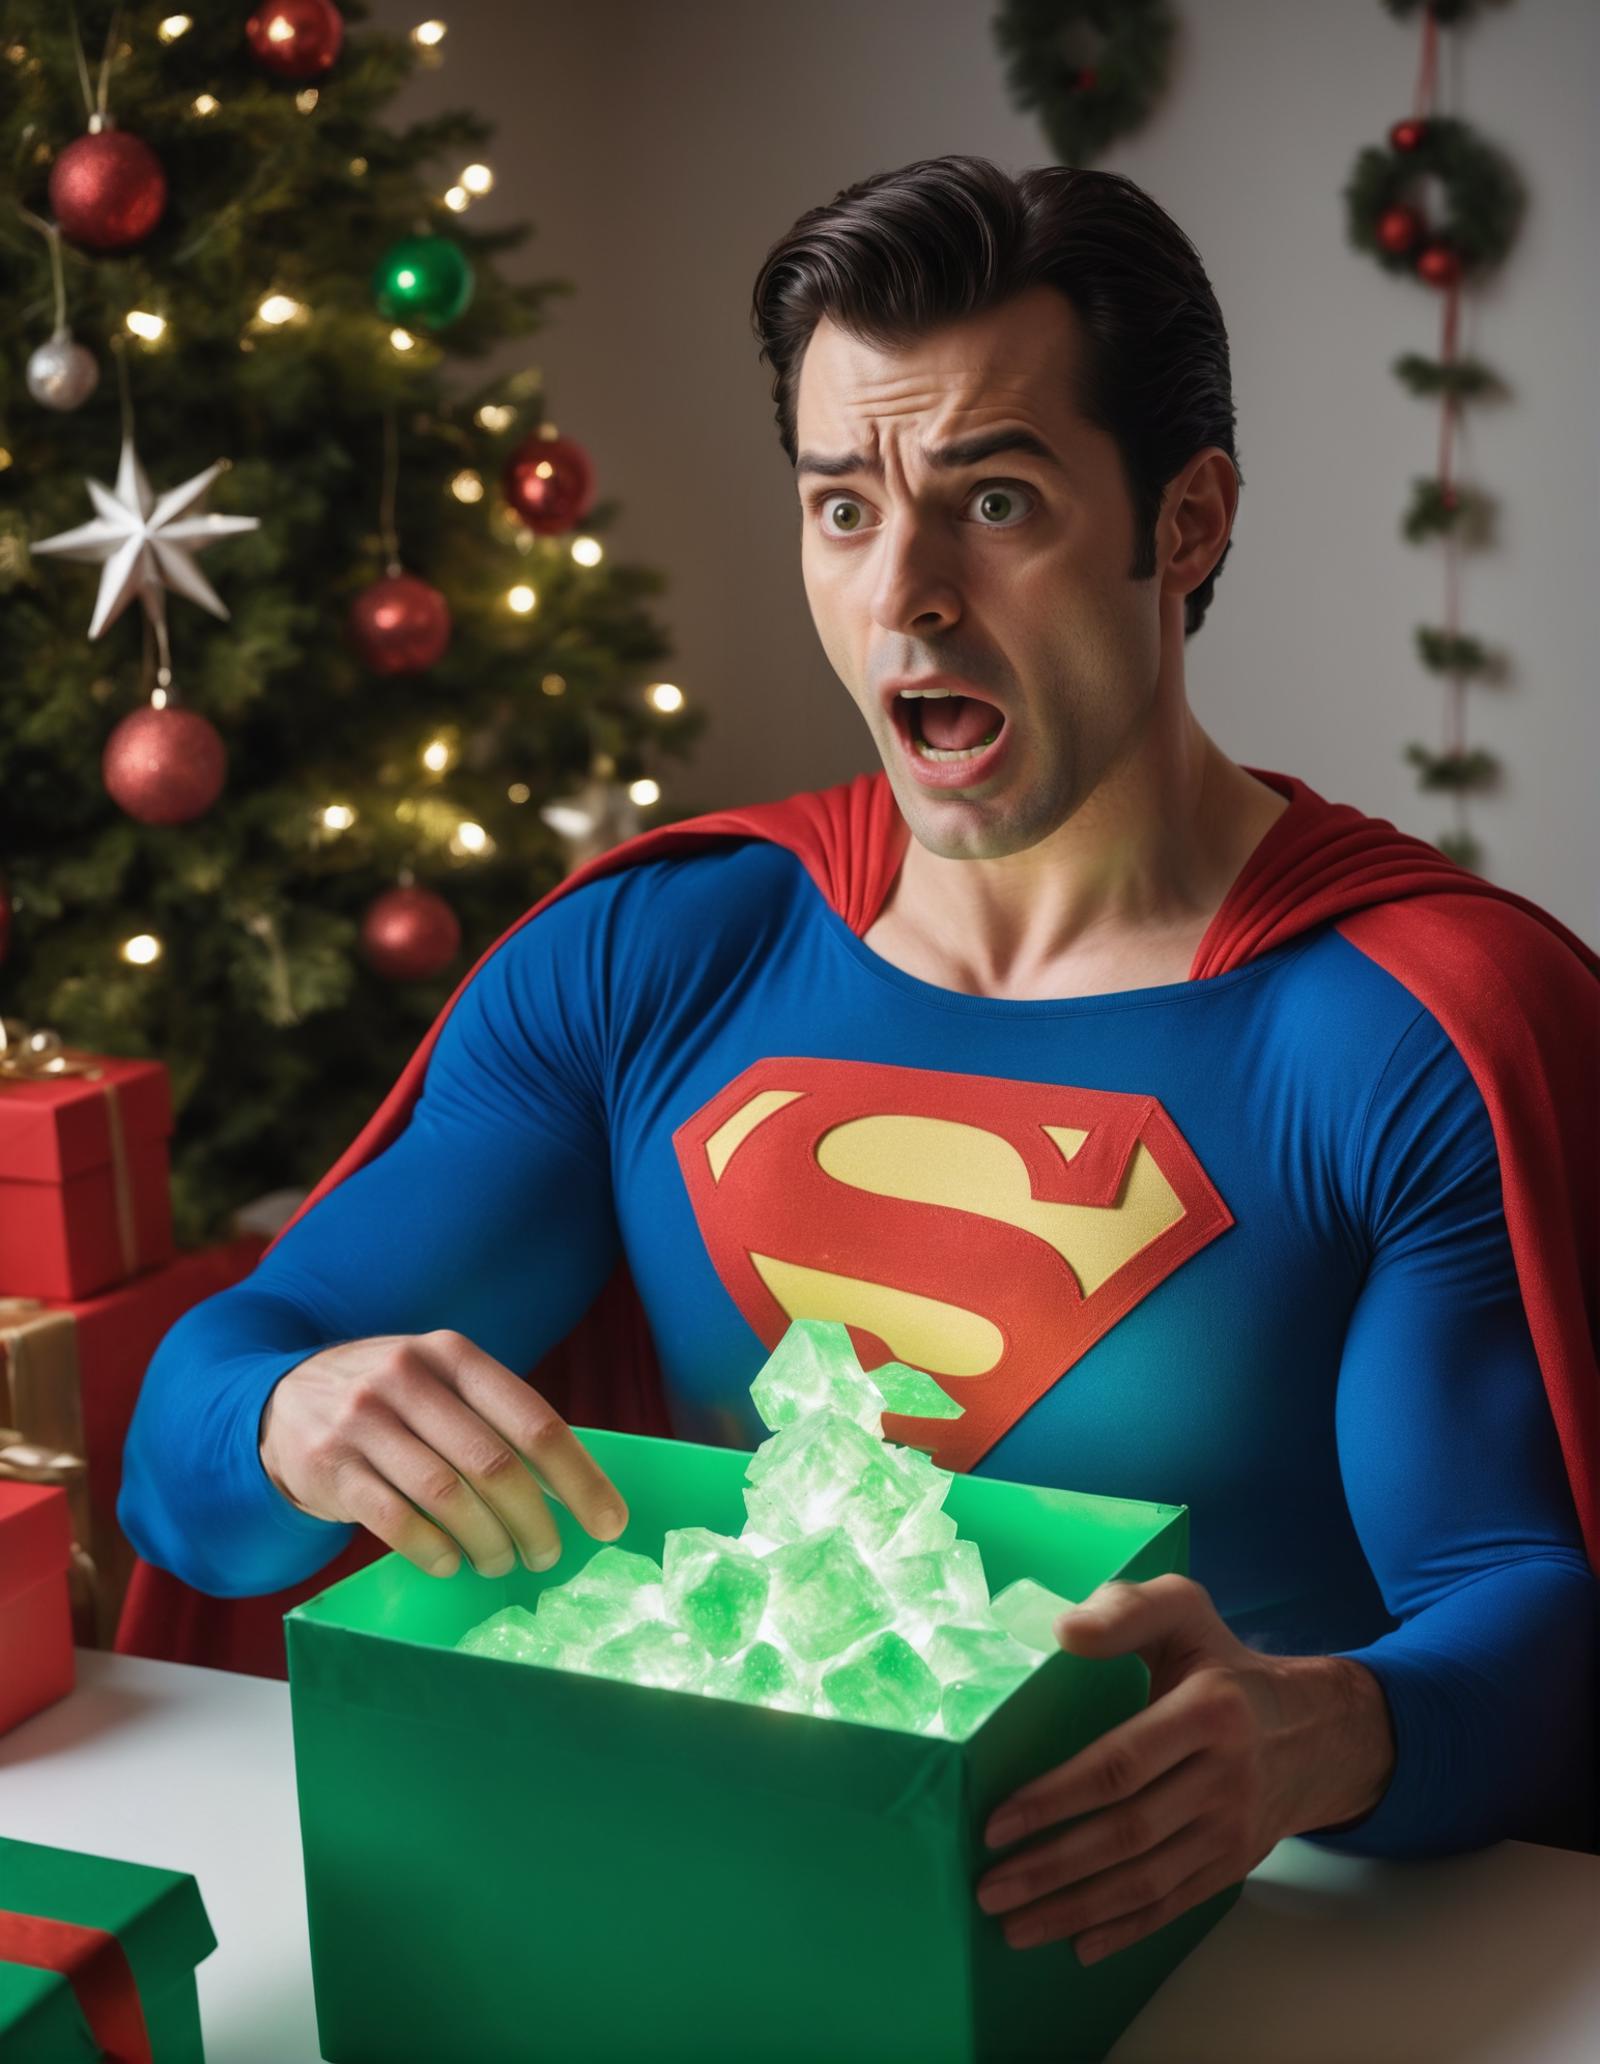 A man in a Superman costume is opening a green box.